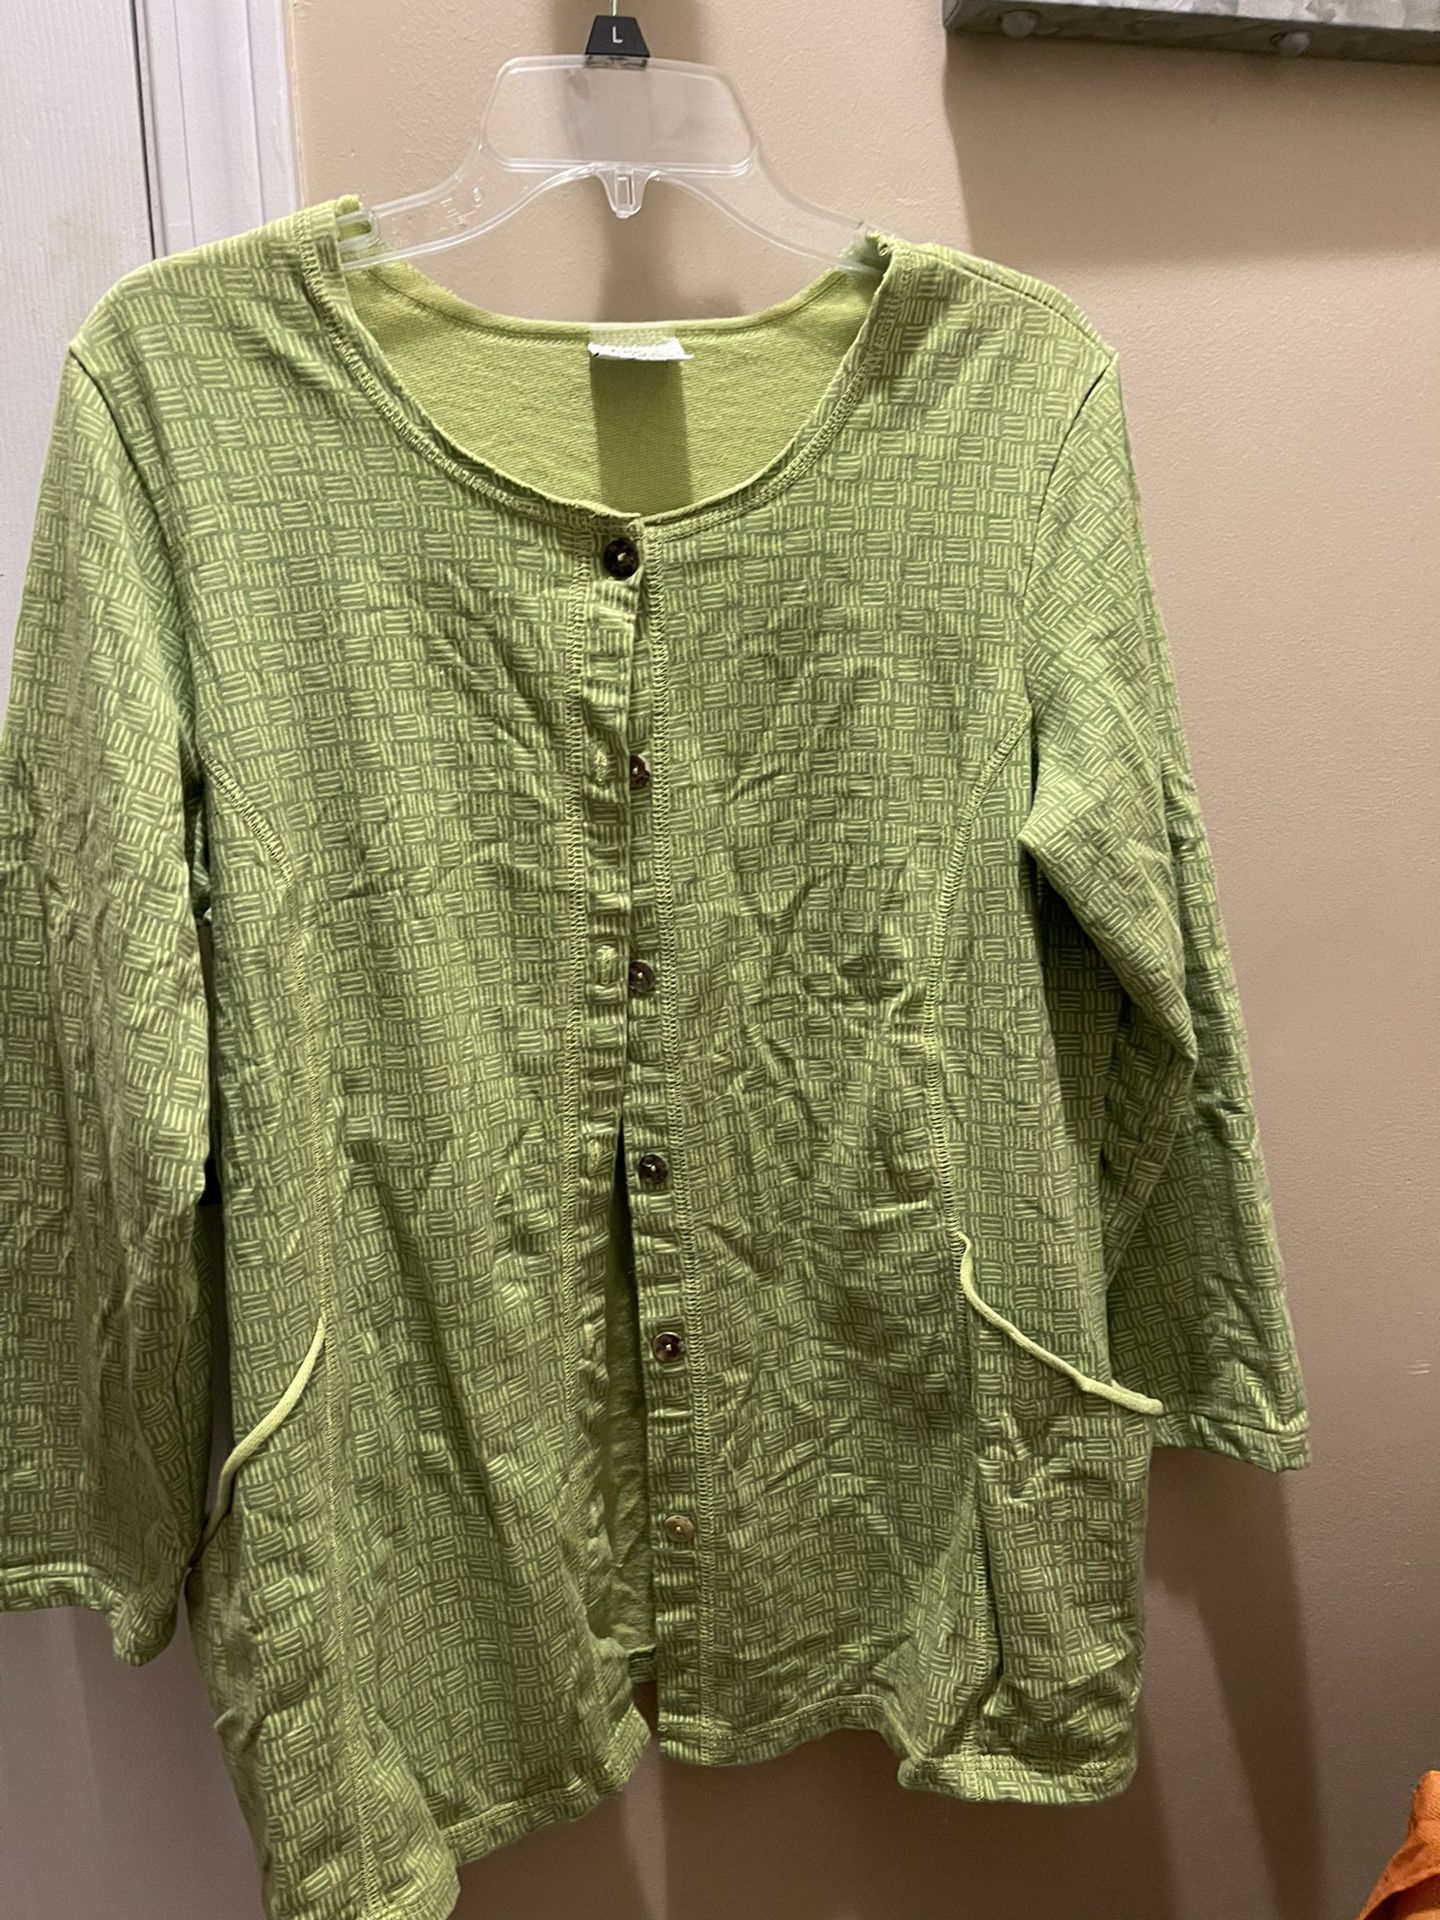 CMC Color Me Cotton Art to Wear French Terry Tunic Shirt Top Large Excellent condition smoke free 